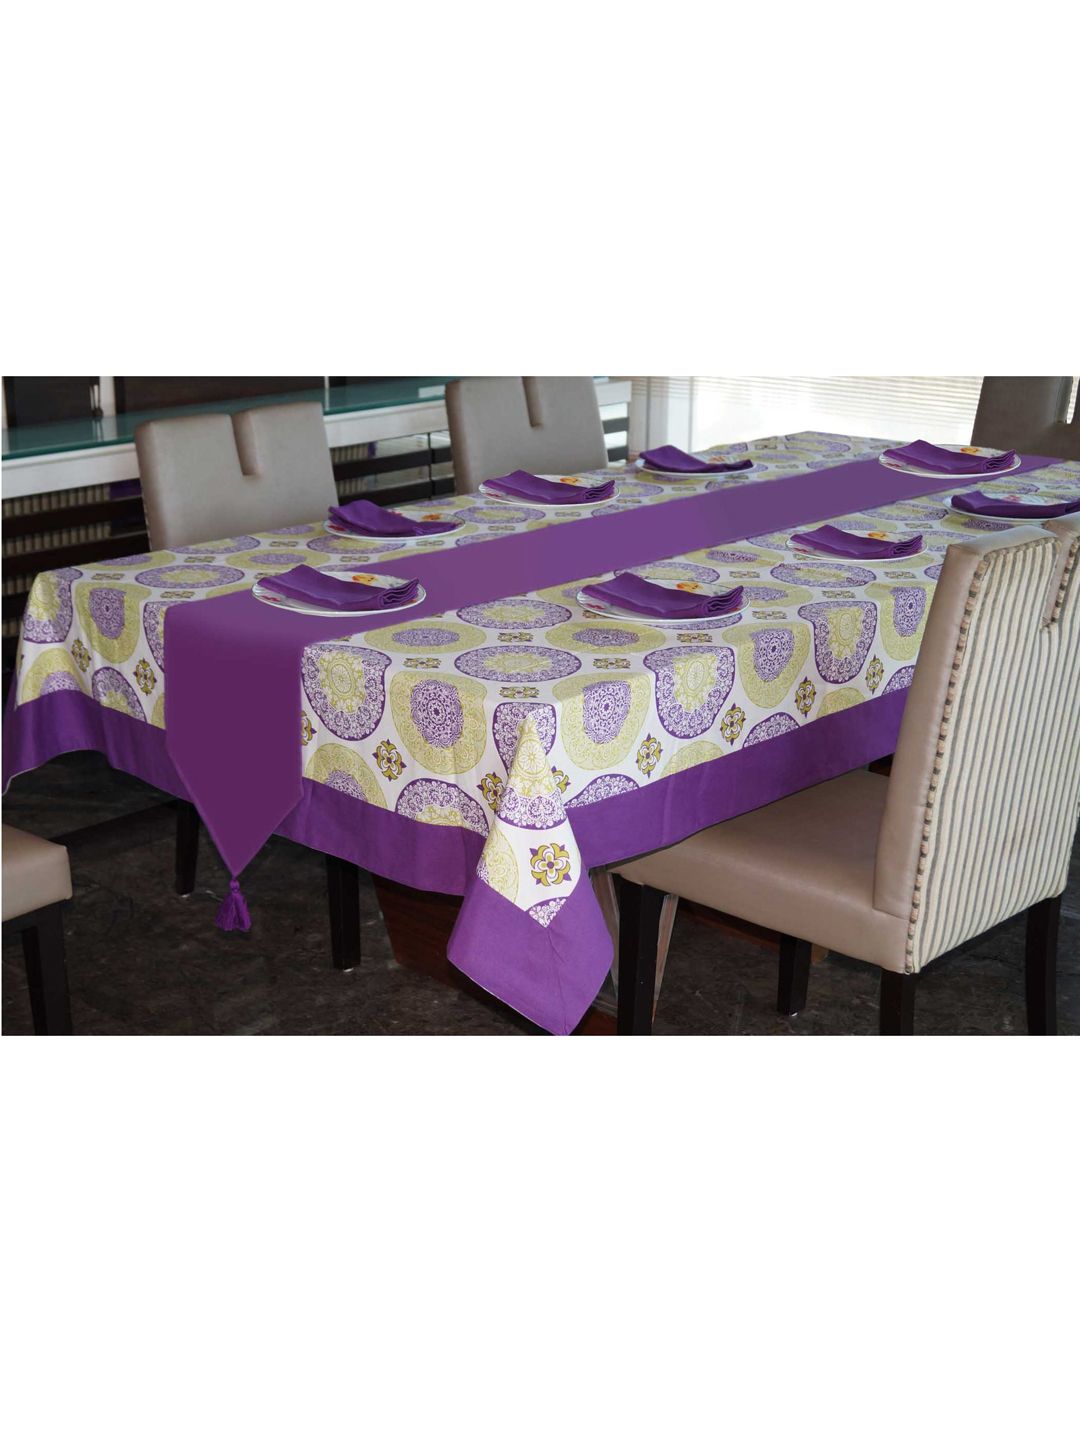 Lushomes Purple Printed 8 Seater Table Linen Set Price in India